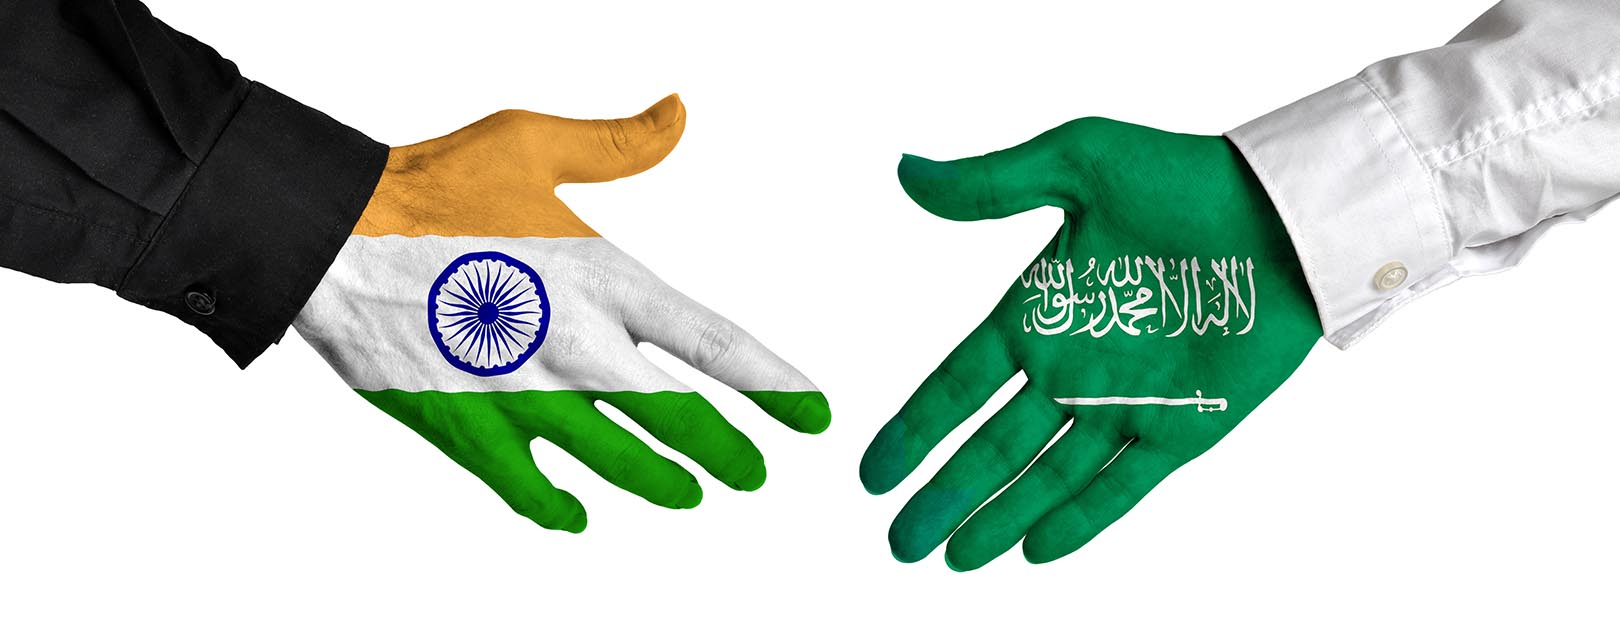 Will Namo spur Indo-Arab trade and infrastructure?